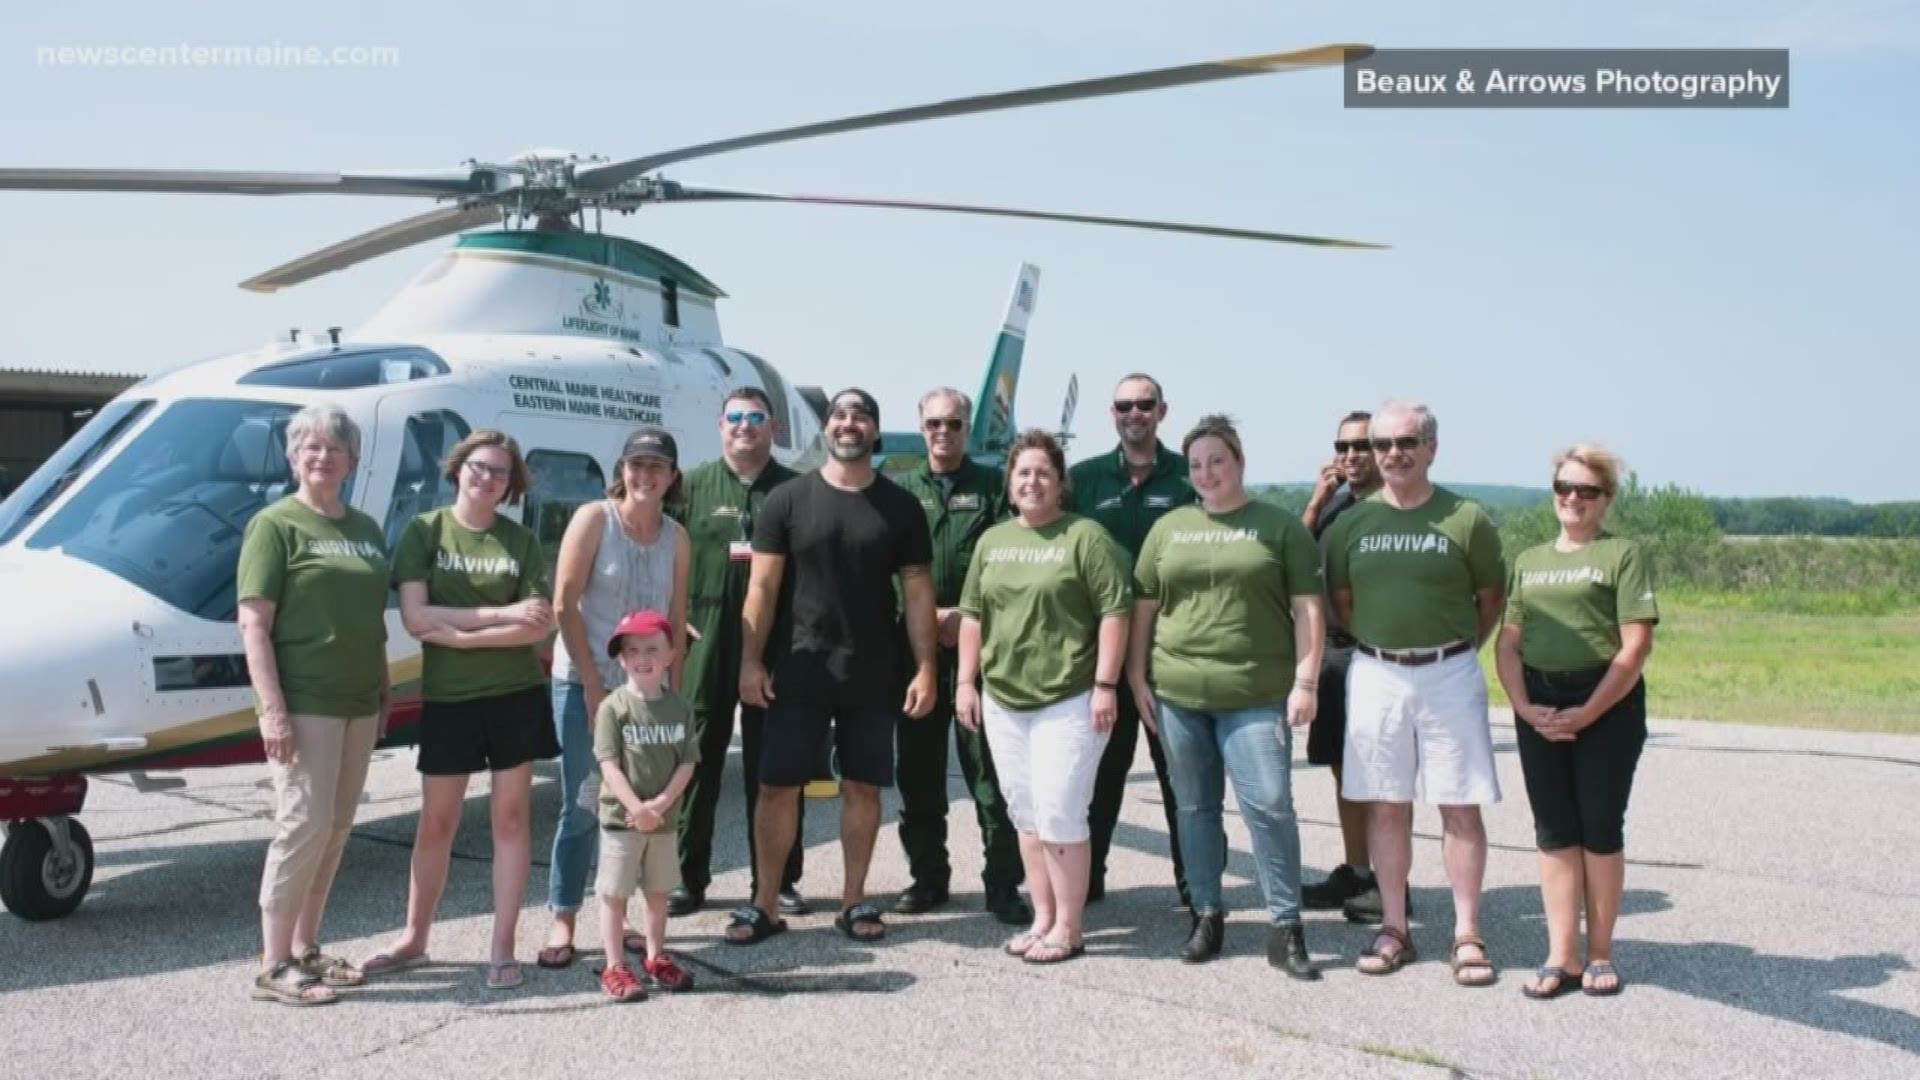 Survivors helped by LifeFlight of Maine uniting through t-shirts